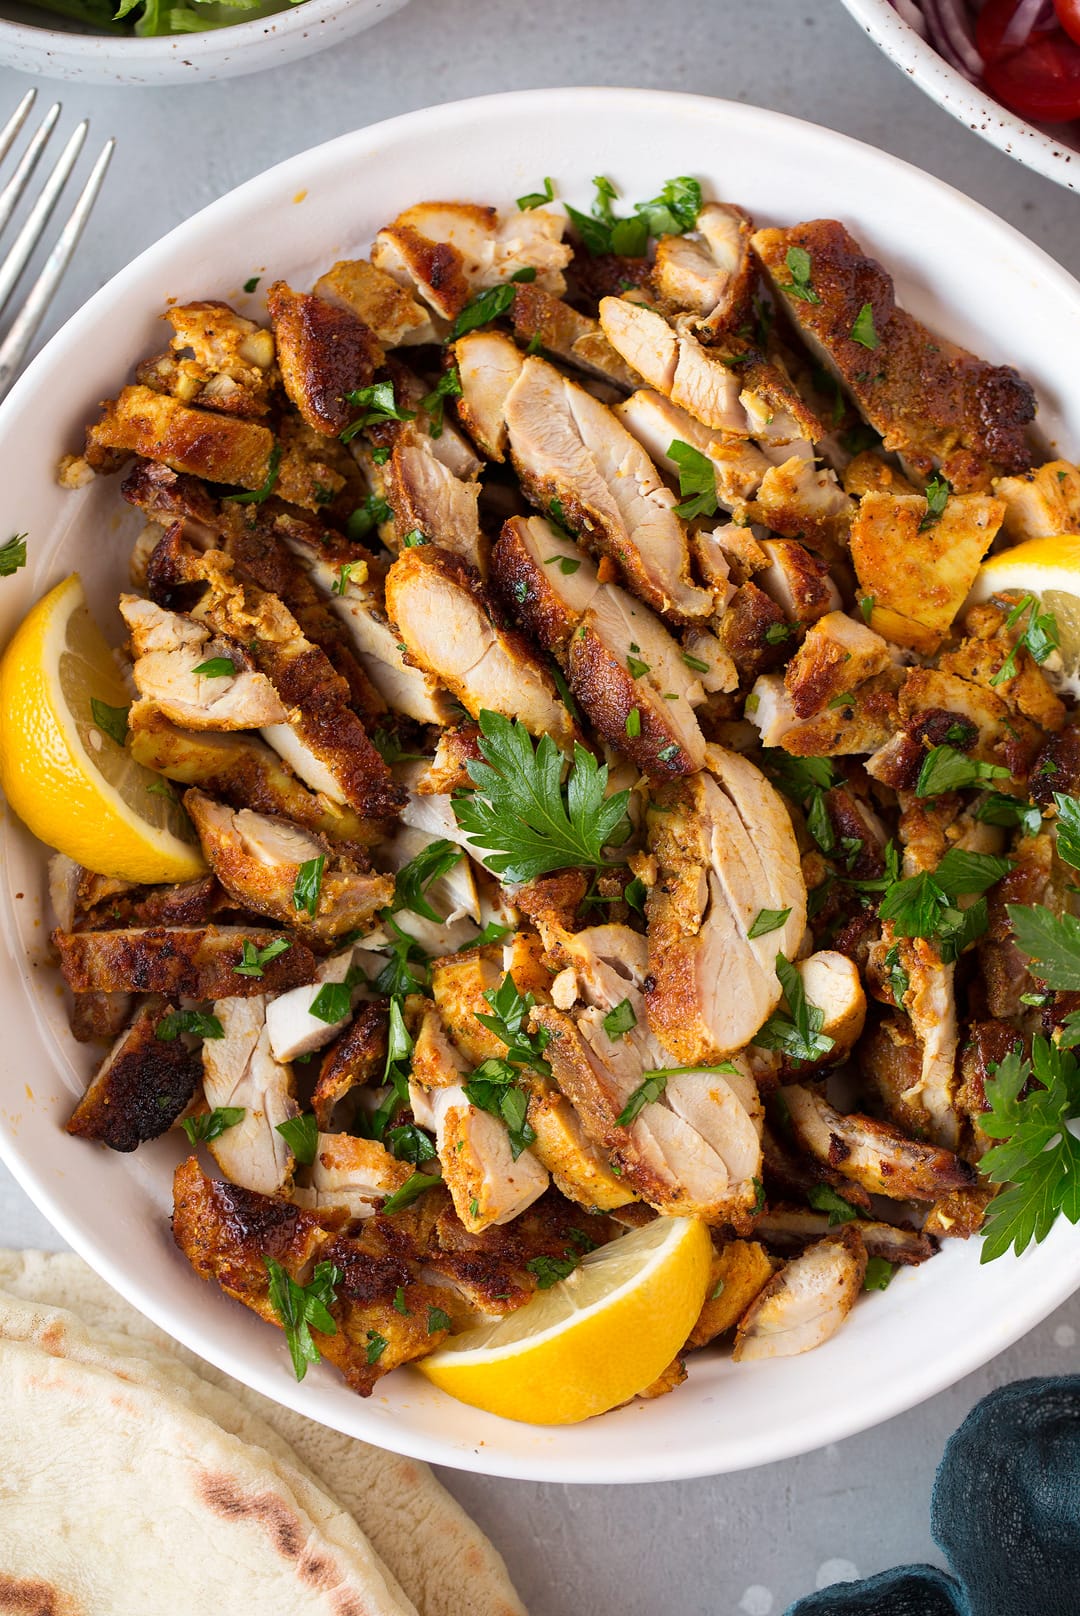 Chicken Shawarma sliced and shown in a serving bowl with lemon wedges and parsley